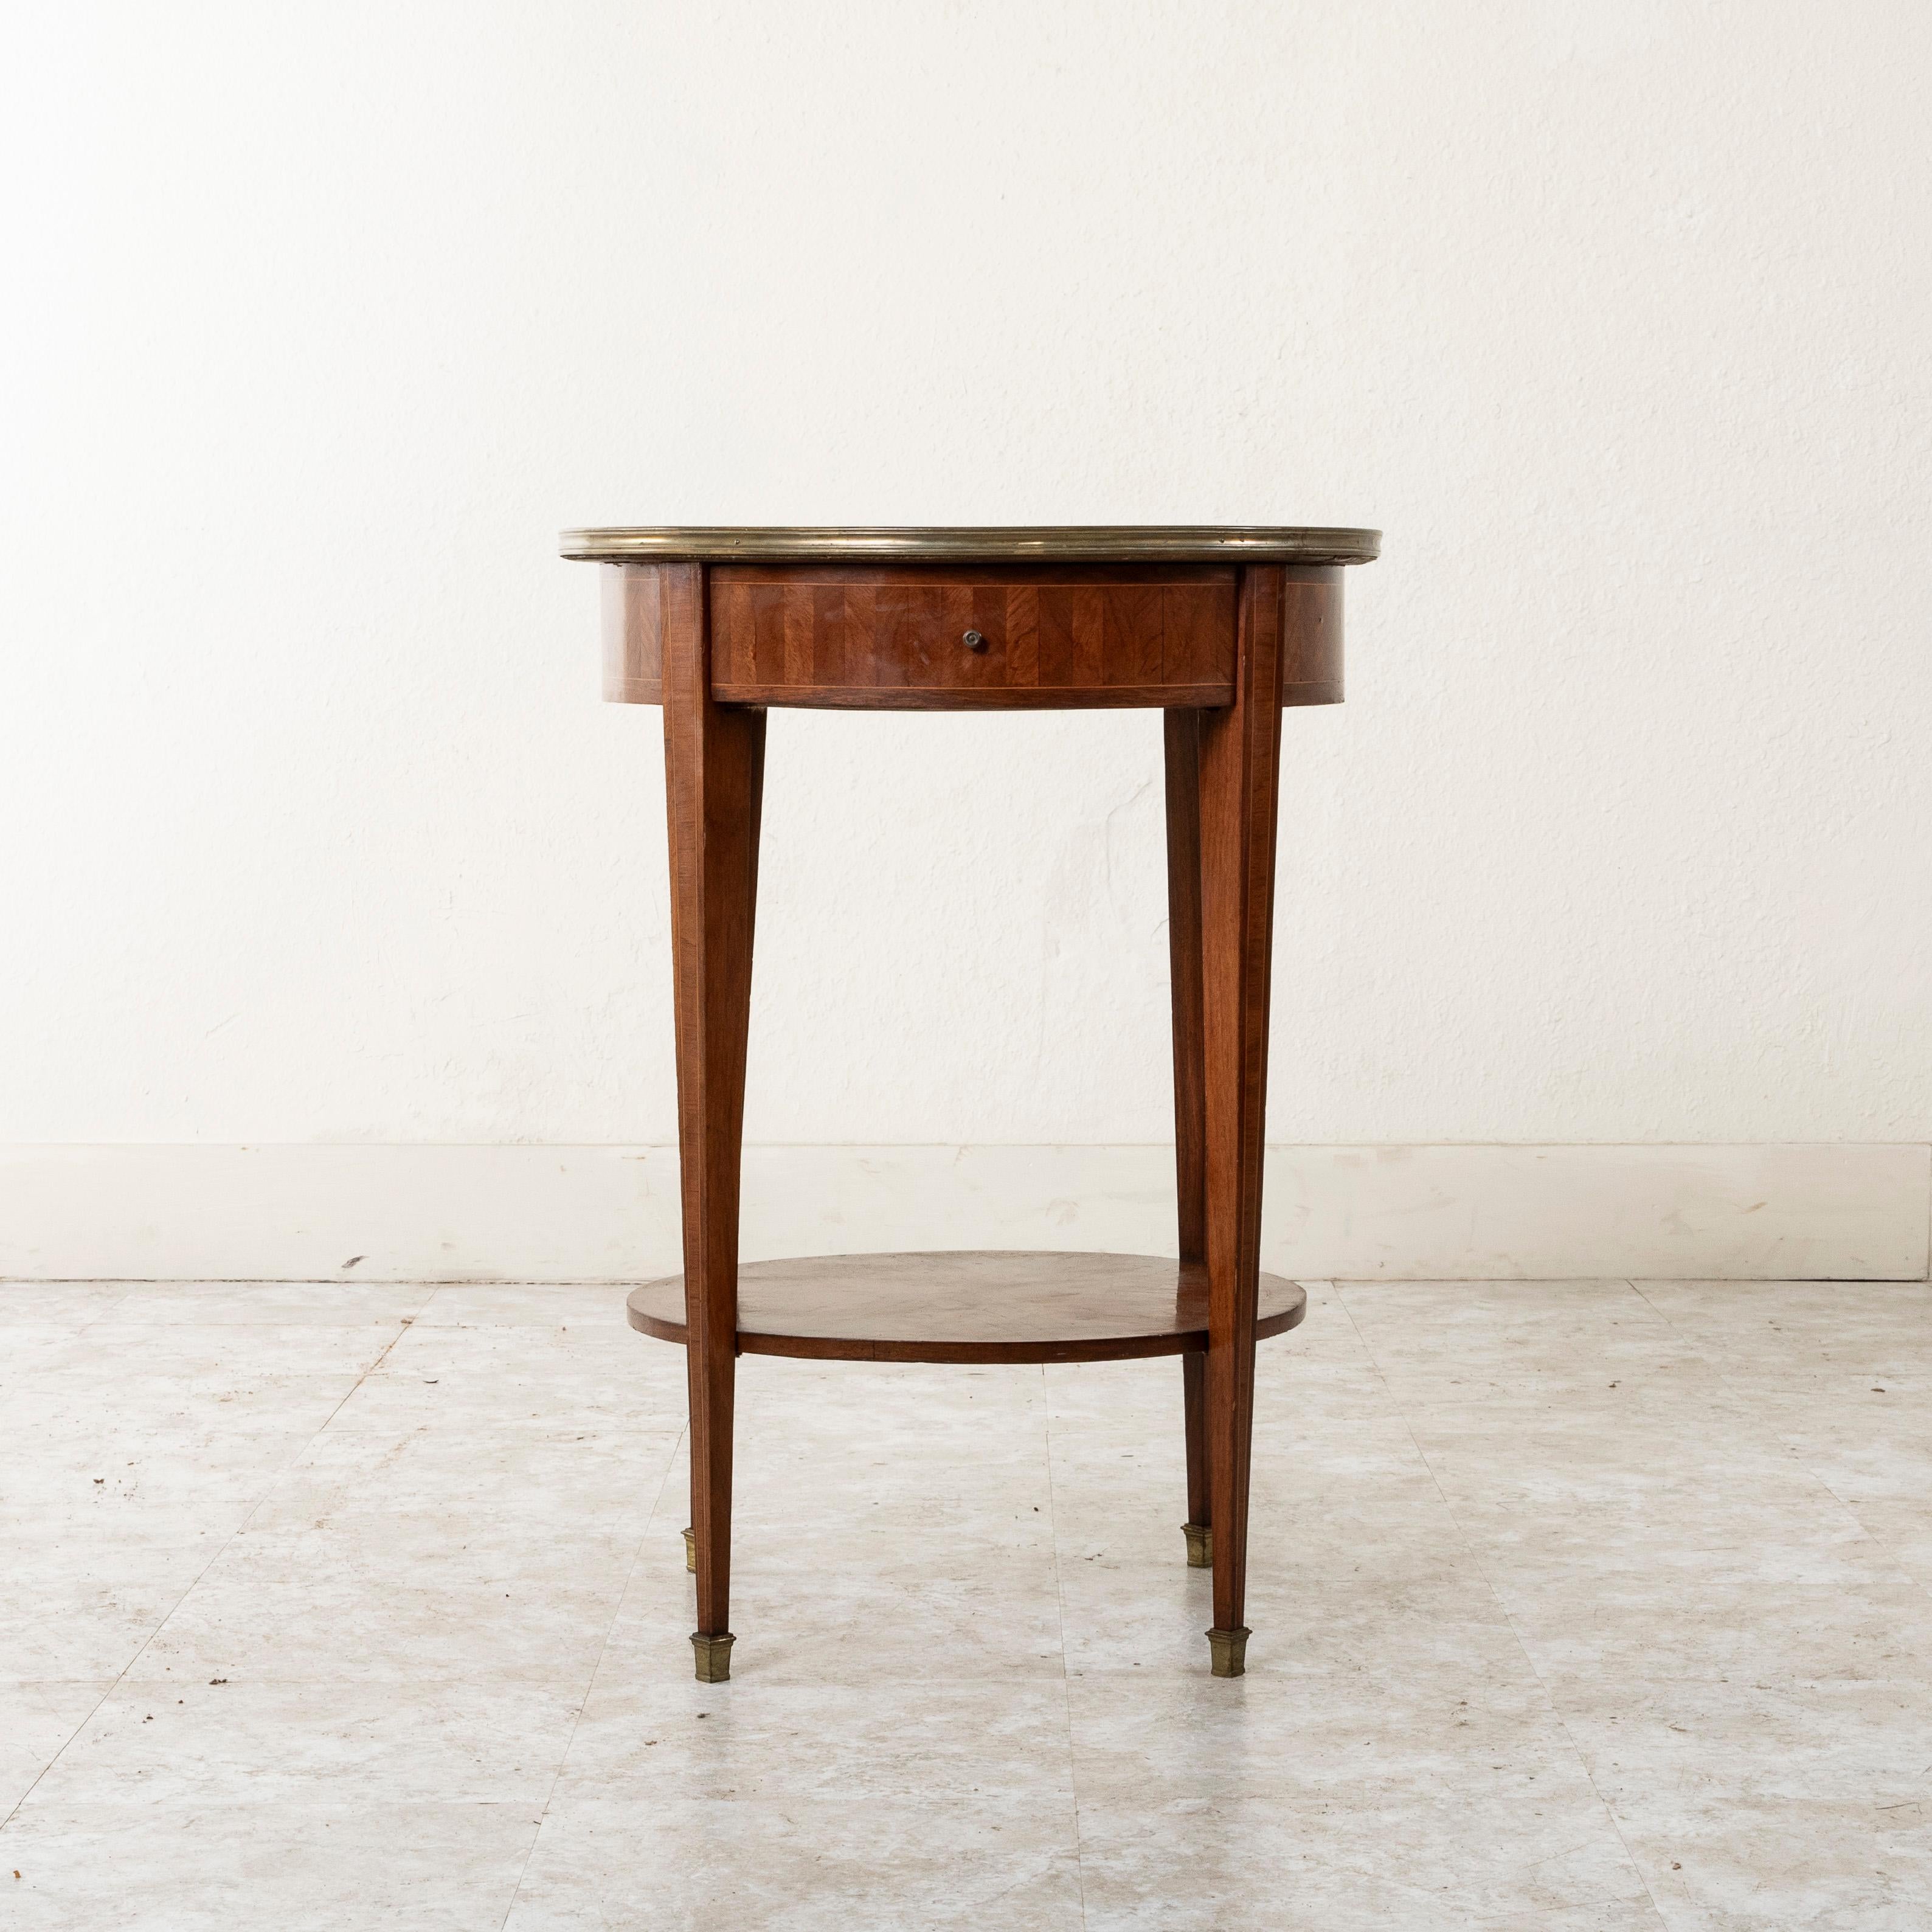 This late nineteenth century French Louis XVI style round gueridon side table features a parquetry top of intricate geometric inlay of rosewood accented with an inset border of inlaid lemonwood.  Bronze trim additionally surrounds the top. The